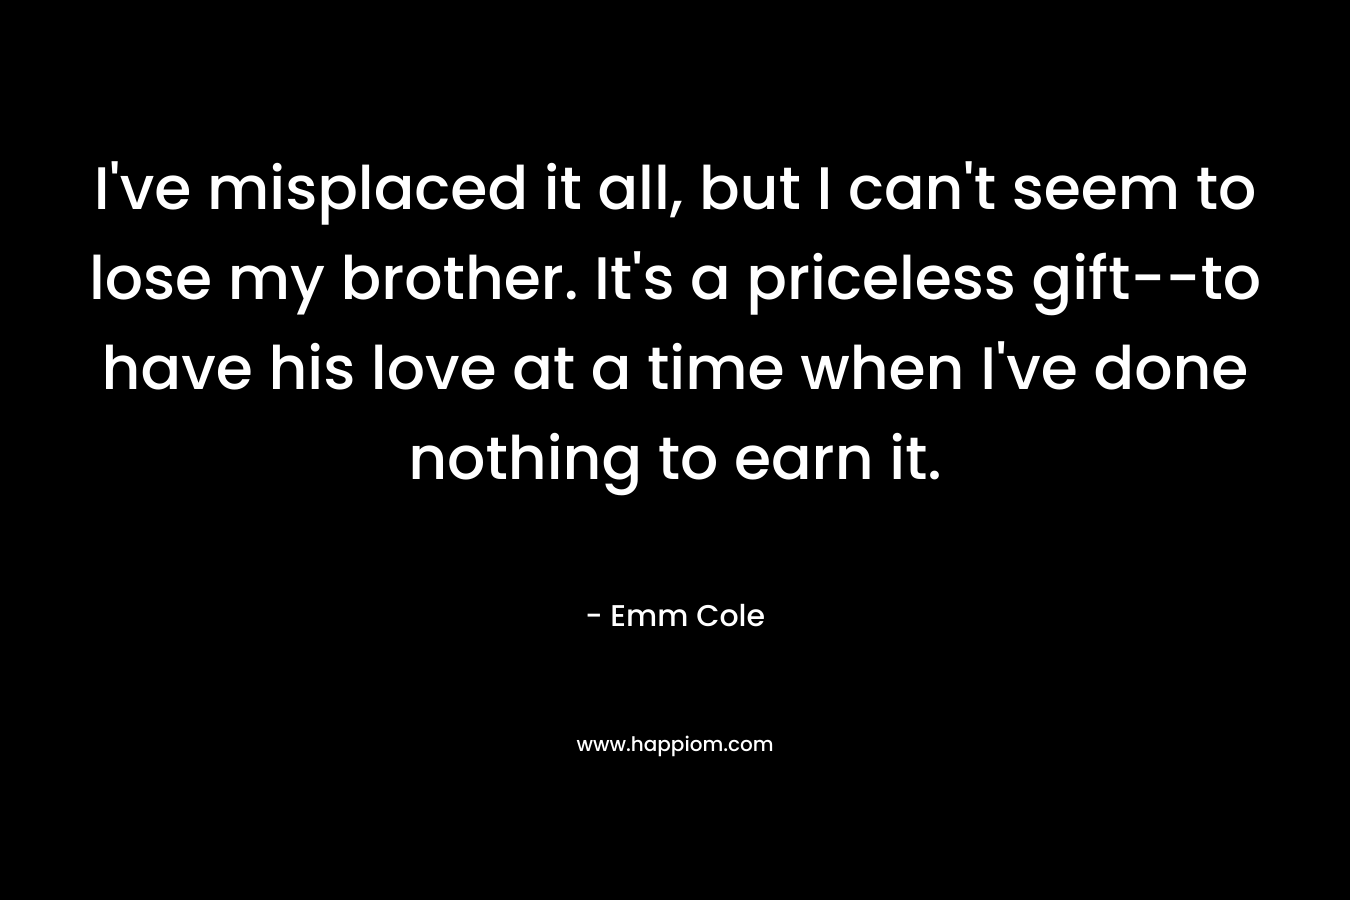 I’ve misplaced it all, but I can’t seem to lose my brother. It’s a priceless gift–to have his love at a time when I’ve done nothing to earn it. – Emm Cole